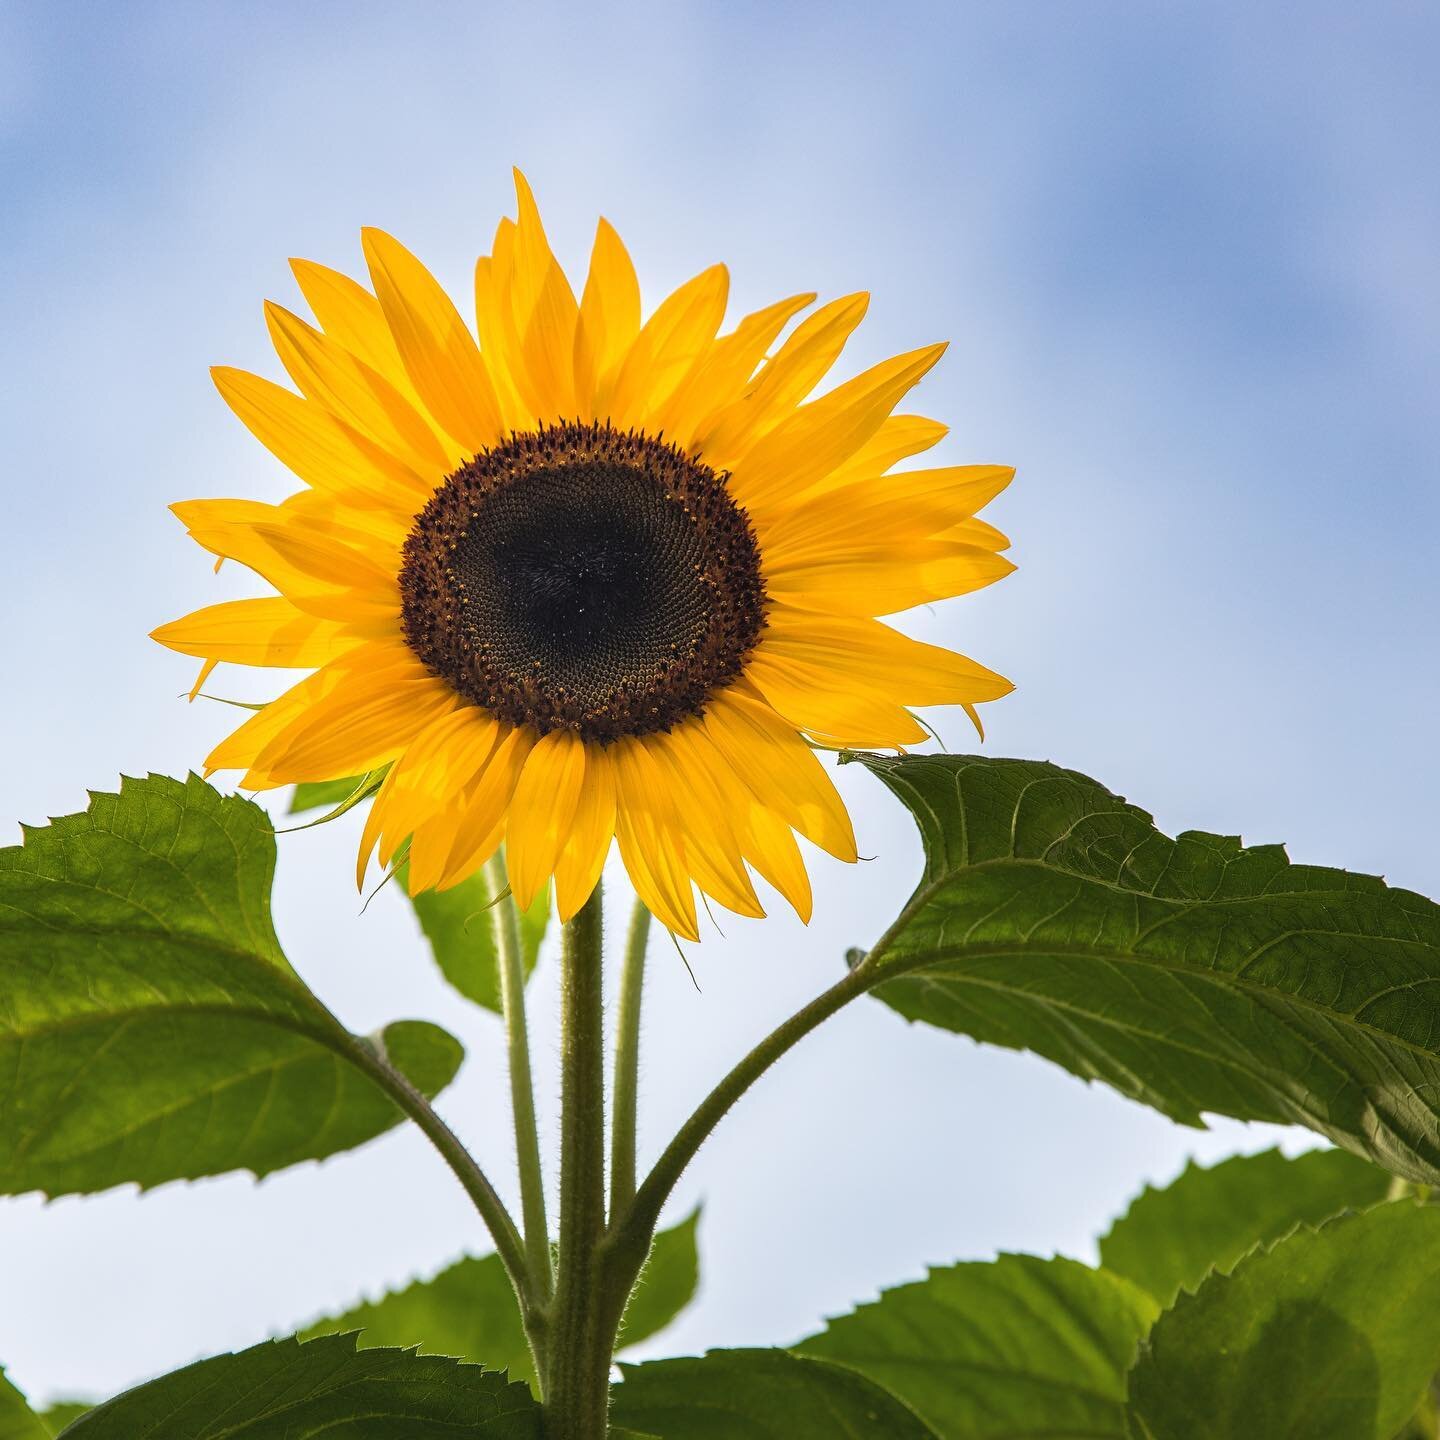 &quot;I want to be like a sunflower; so that even on the darkest days I will stand tall and find the sunlight.&quot; &ndash; Unknown 
_______________________
#sunflower #tournesol #flowersofinstagram #eglintonpark #summerflowers #torontoparks #sunflo